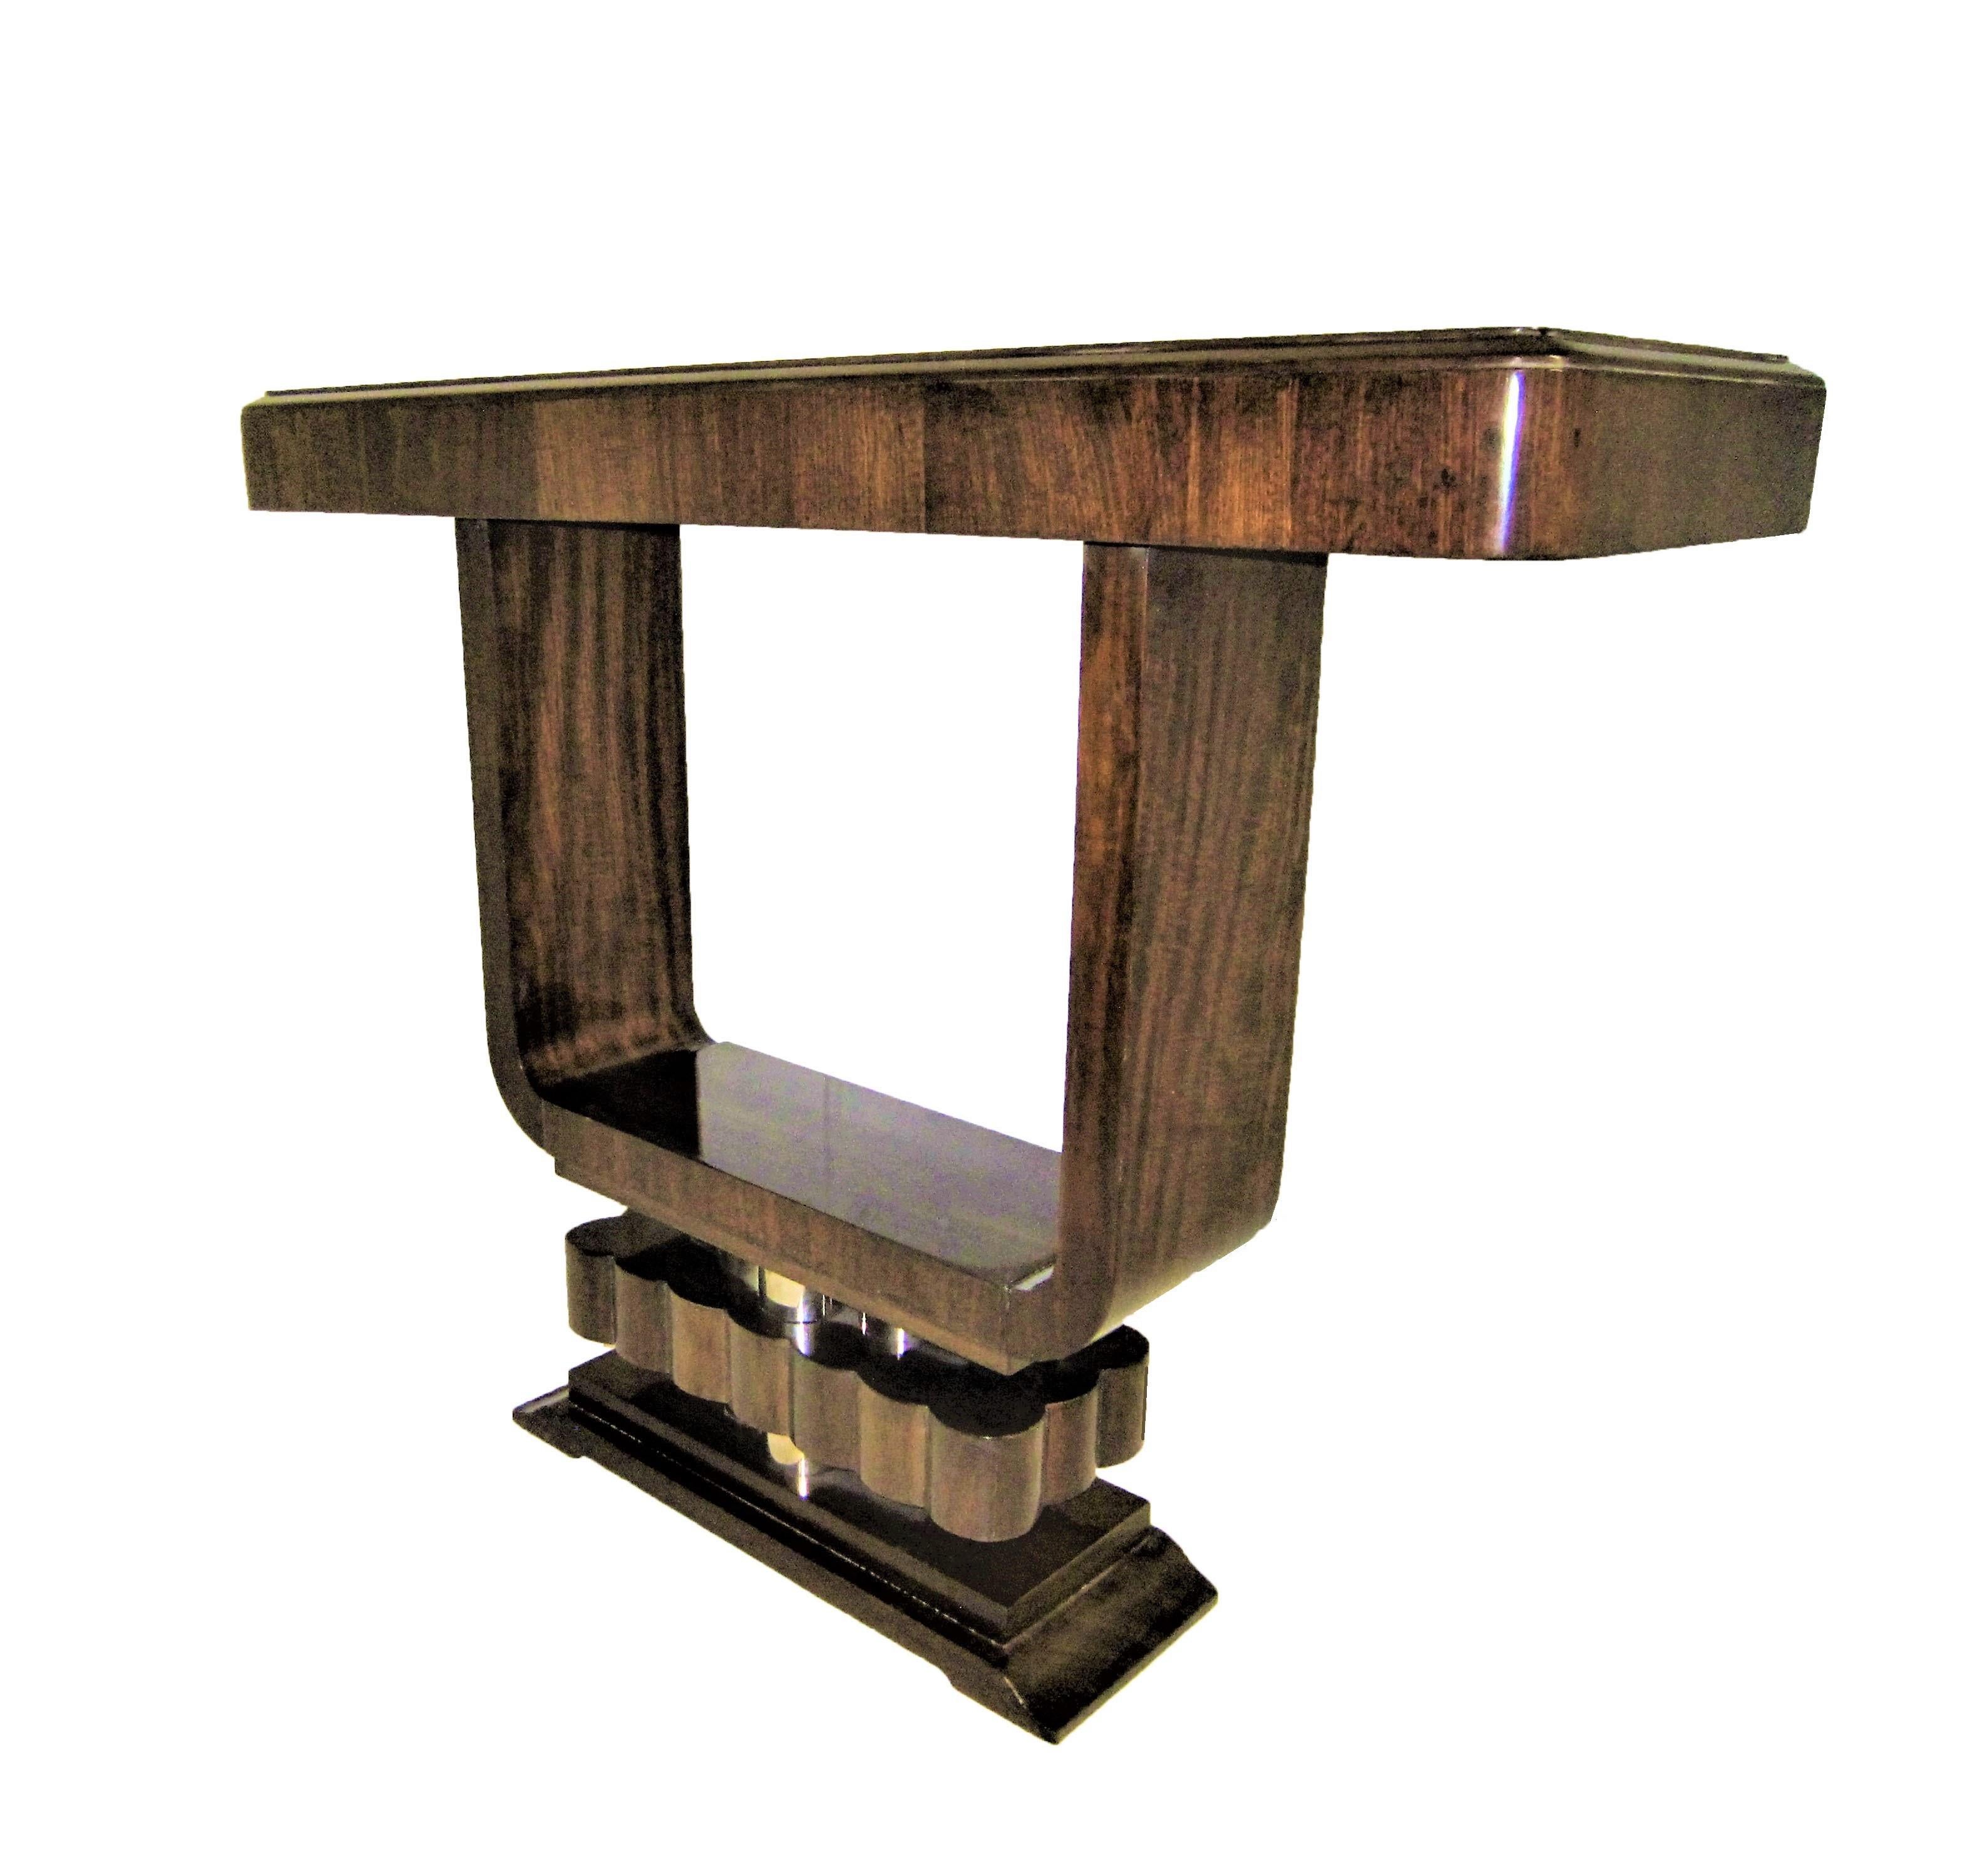 A fabulous original French Modern petite console of open cube form, raised on stepped and fluted pediment base. The negative area created in the center serves as a viewfinder which focuses our sight on the clean lines and simplicity of the form thus